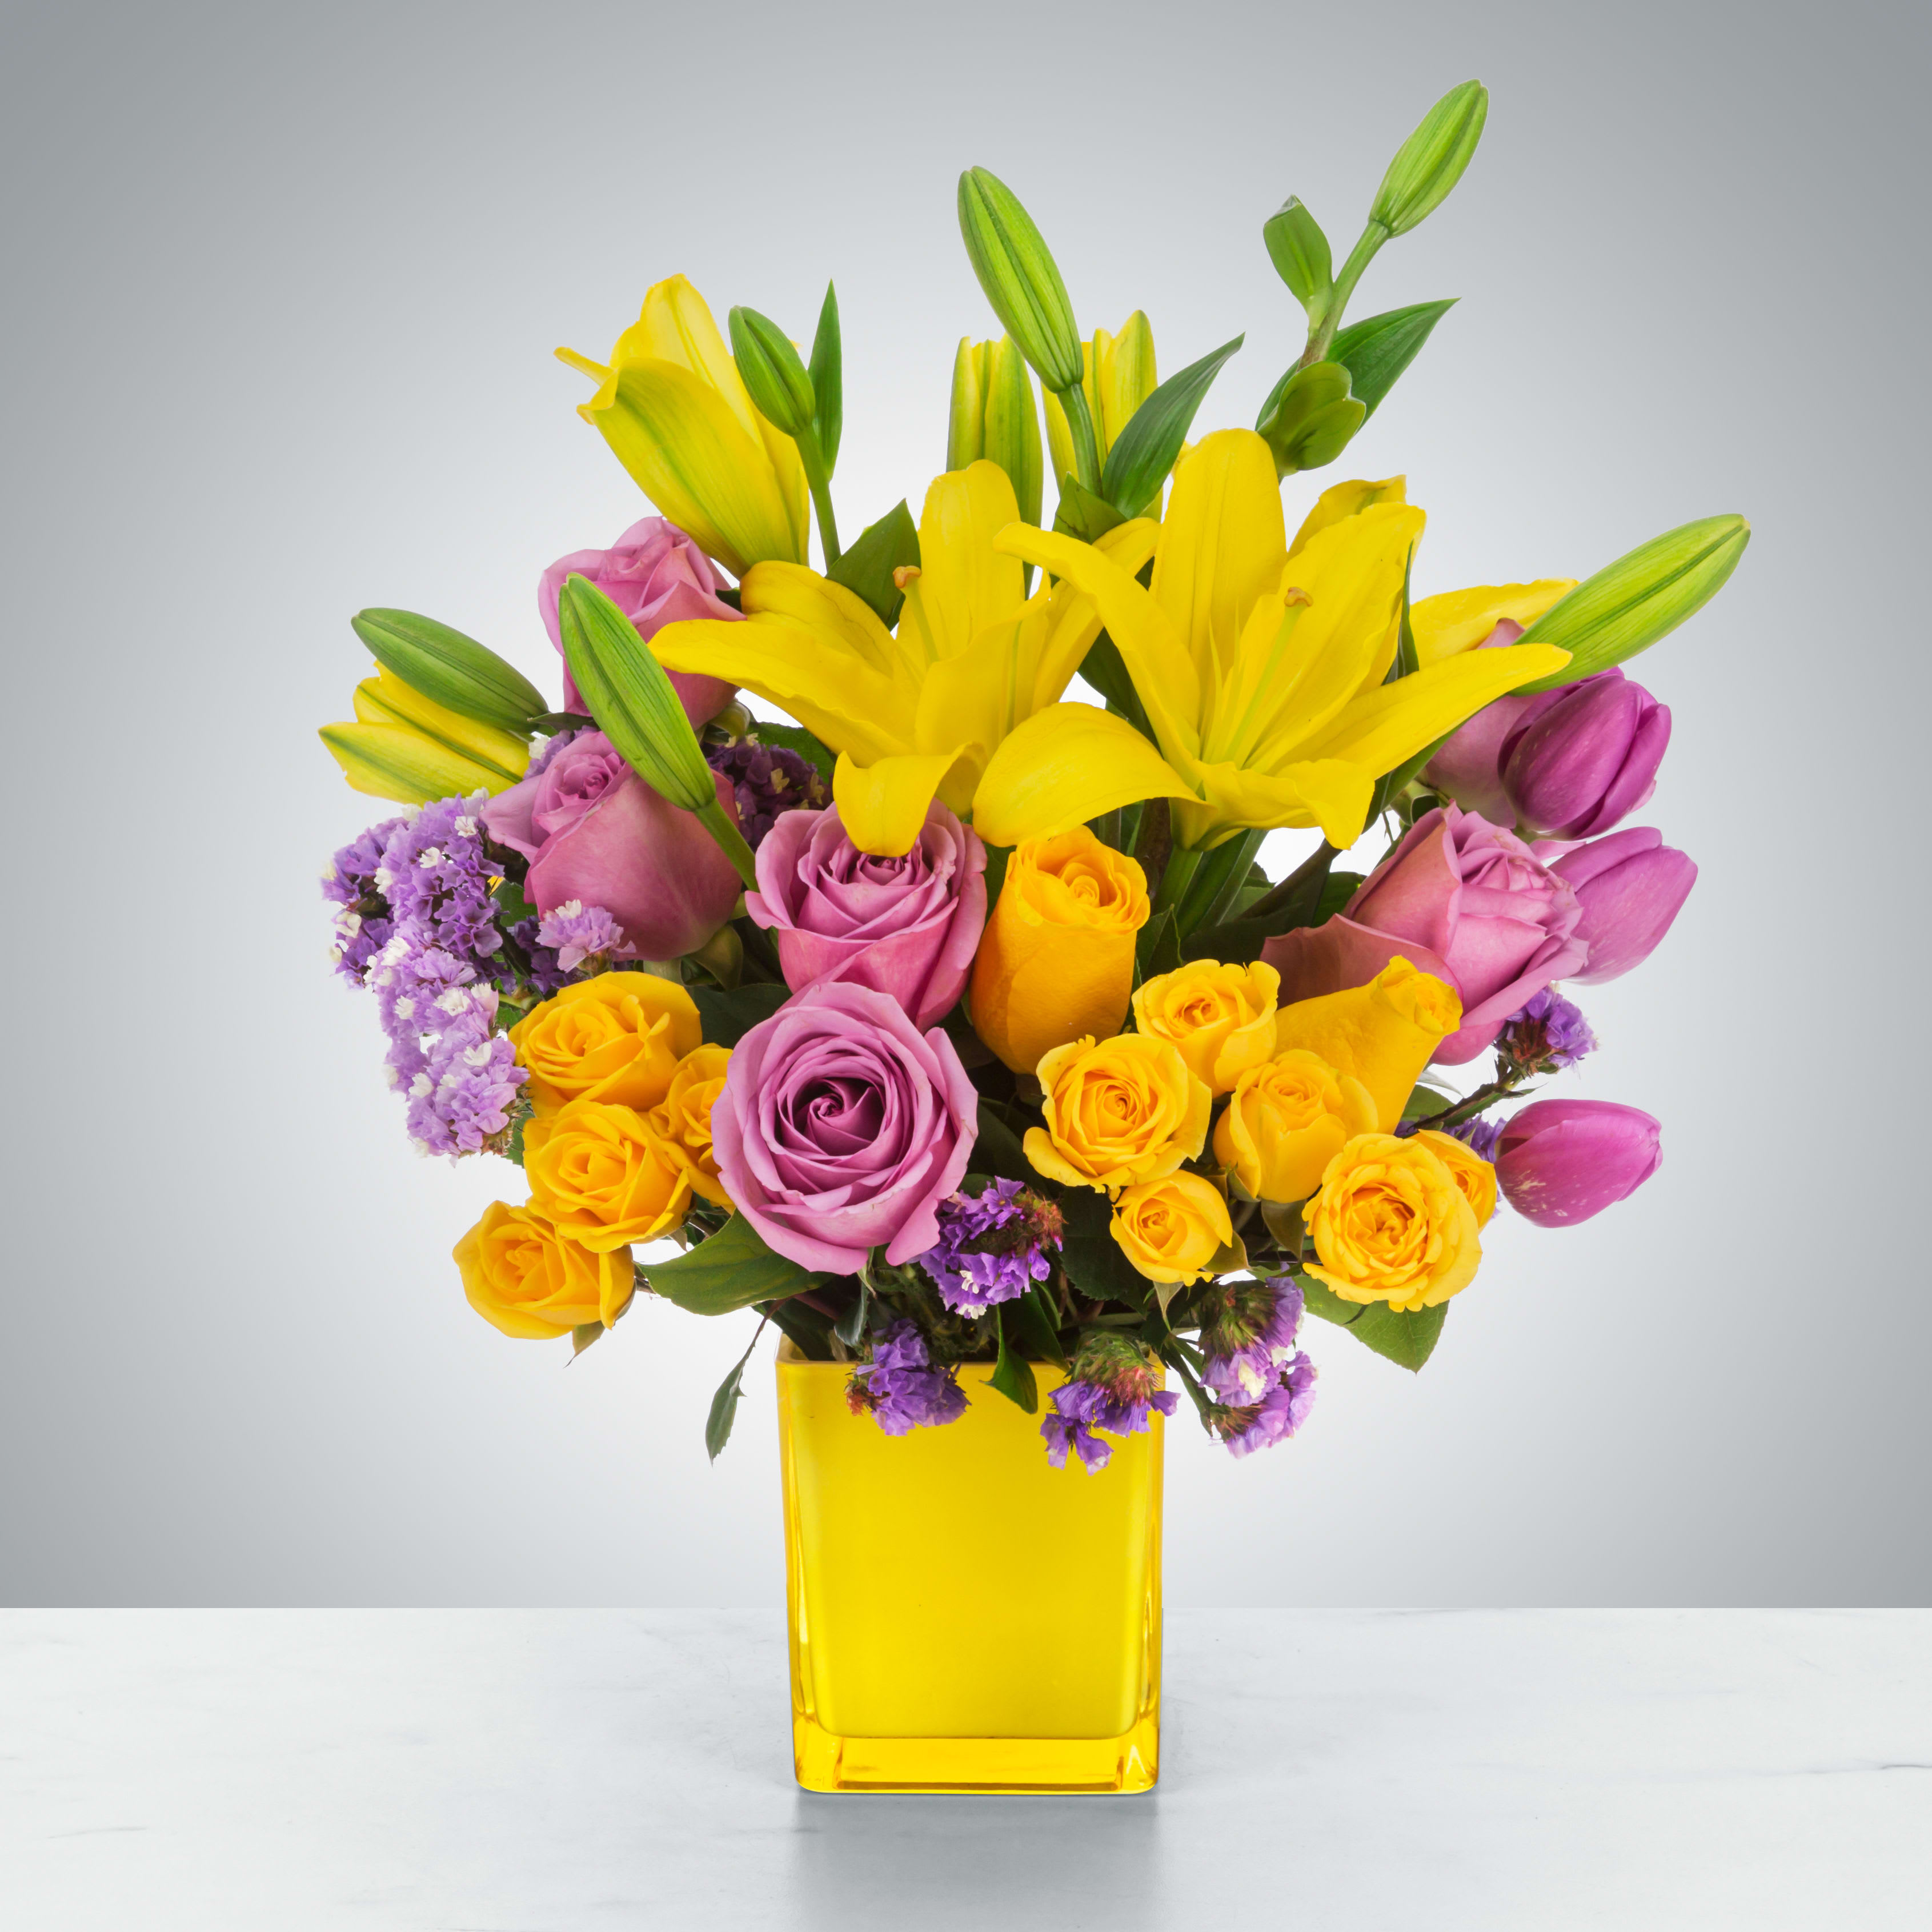 Sunday Afternoon - This arrangement is a sweet surprise for any recipient. Featuring a selection of yellow and purple flowers in a yellow vase, this arrangement is springtime in flower form and a great gift for Easter or Passover.  Approximate Dimensions: 13&quot;D x 16&quot;H